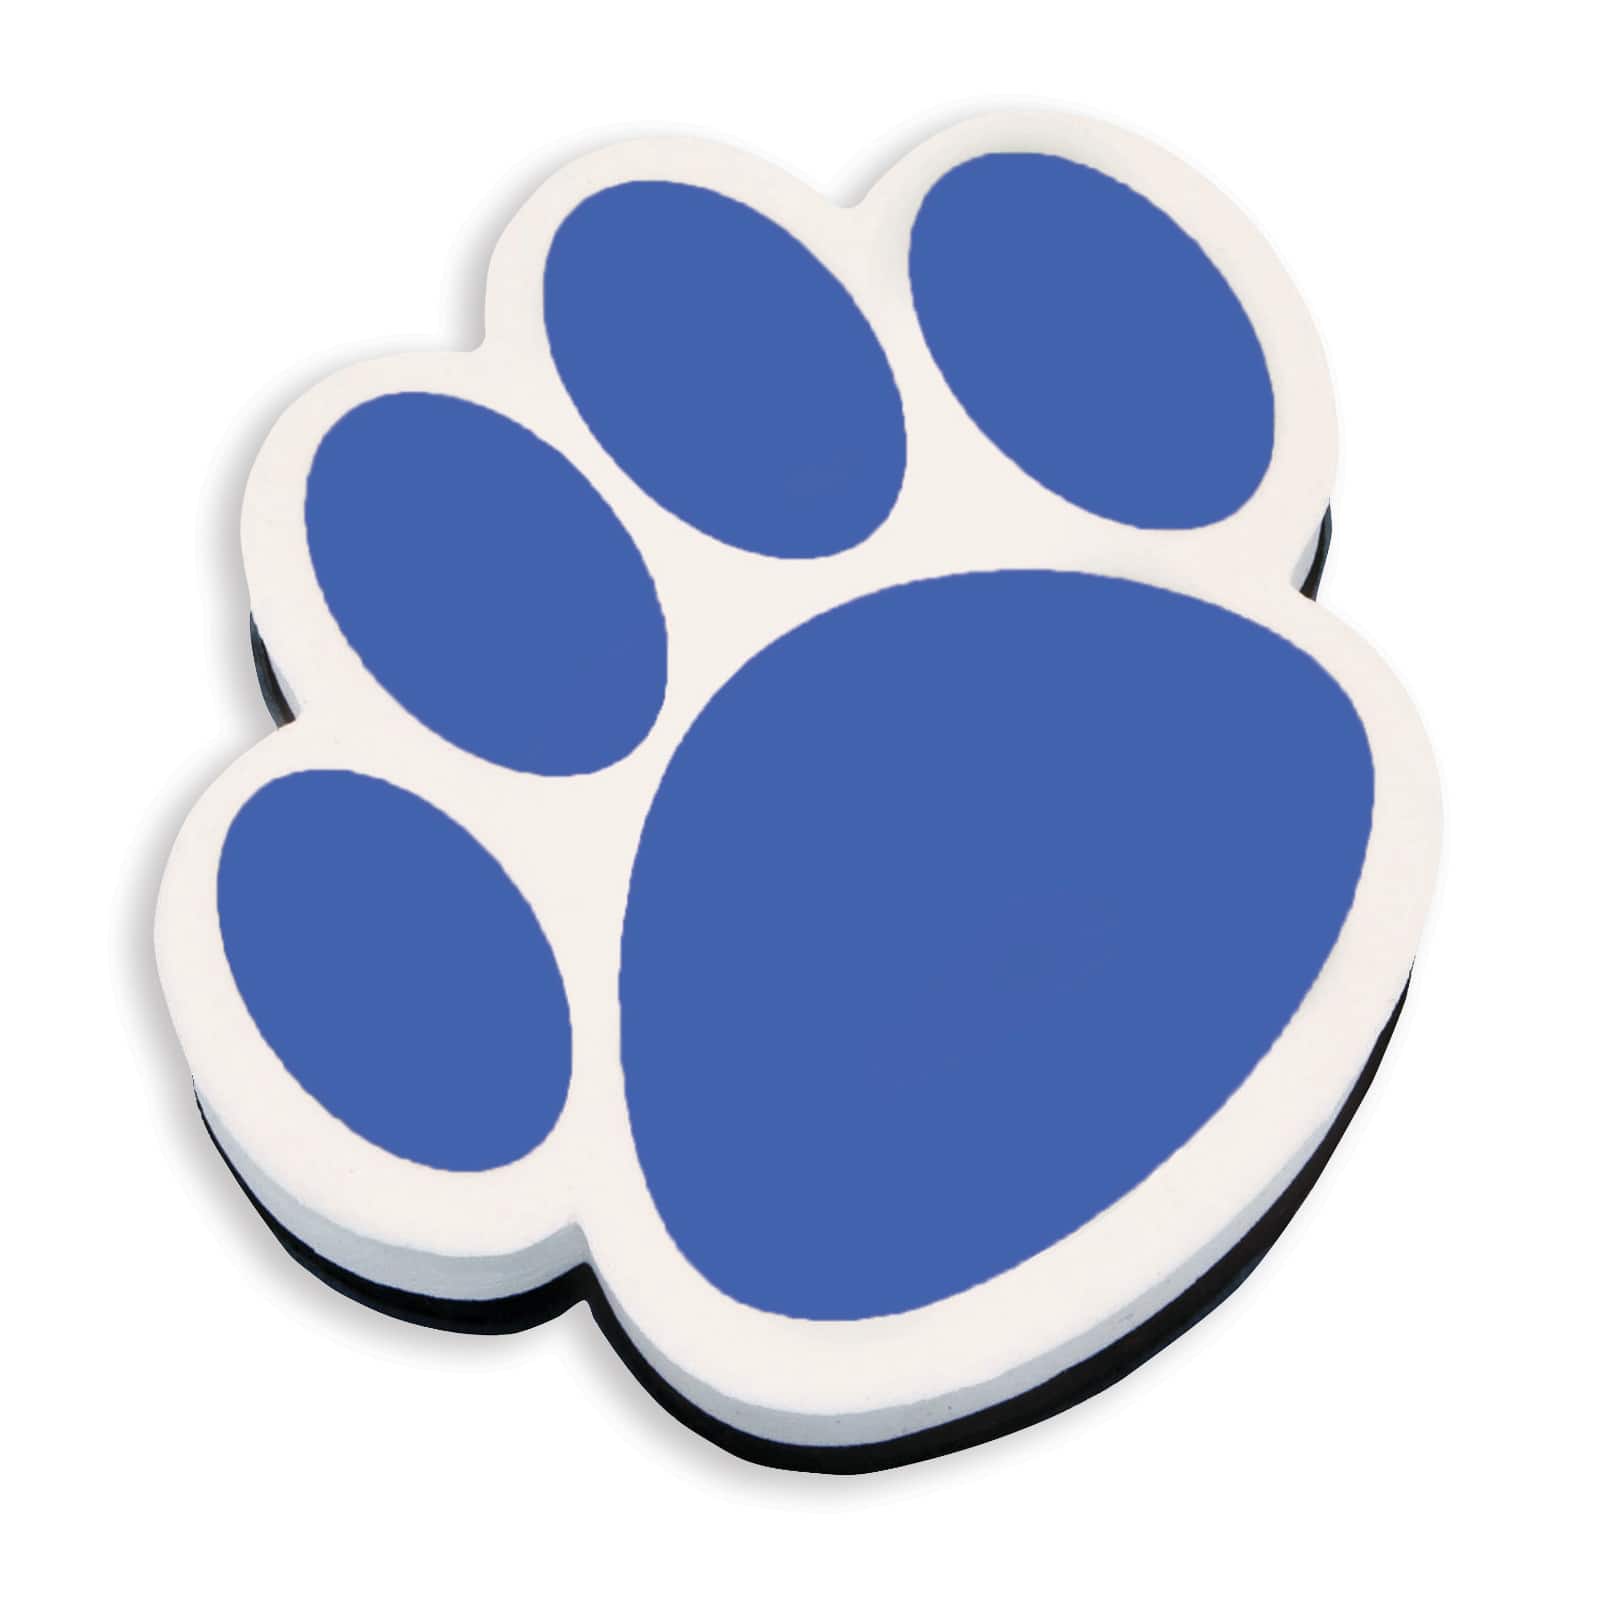 Ashley Productions Magnetic Paw Whiteboard Eraser, 6ct.